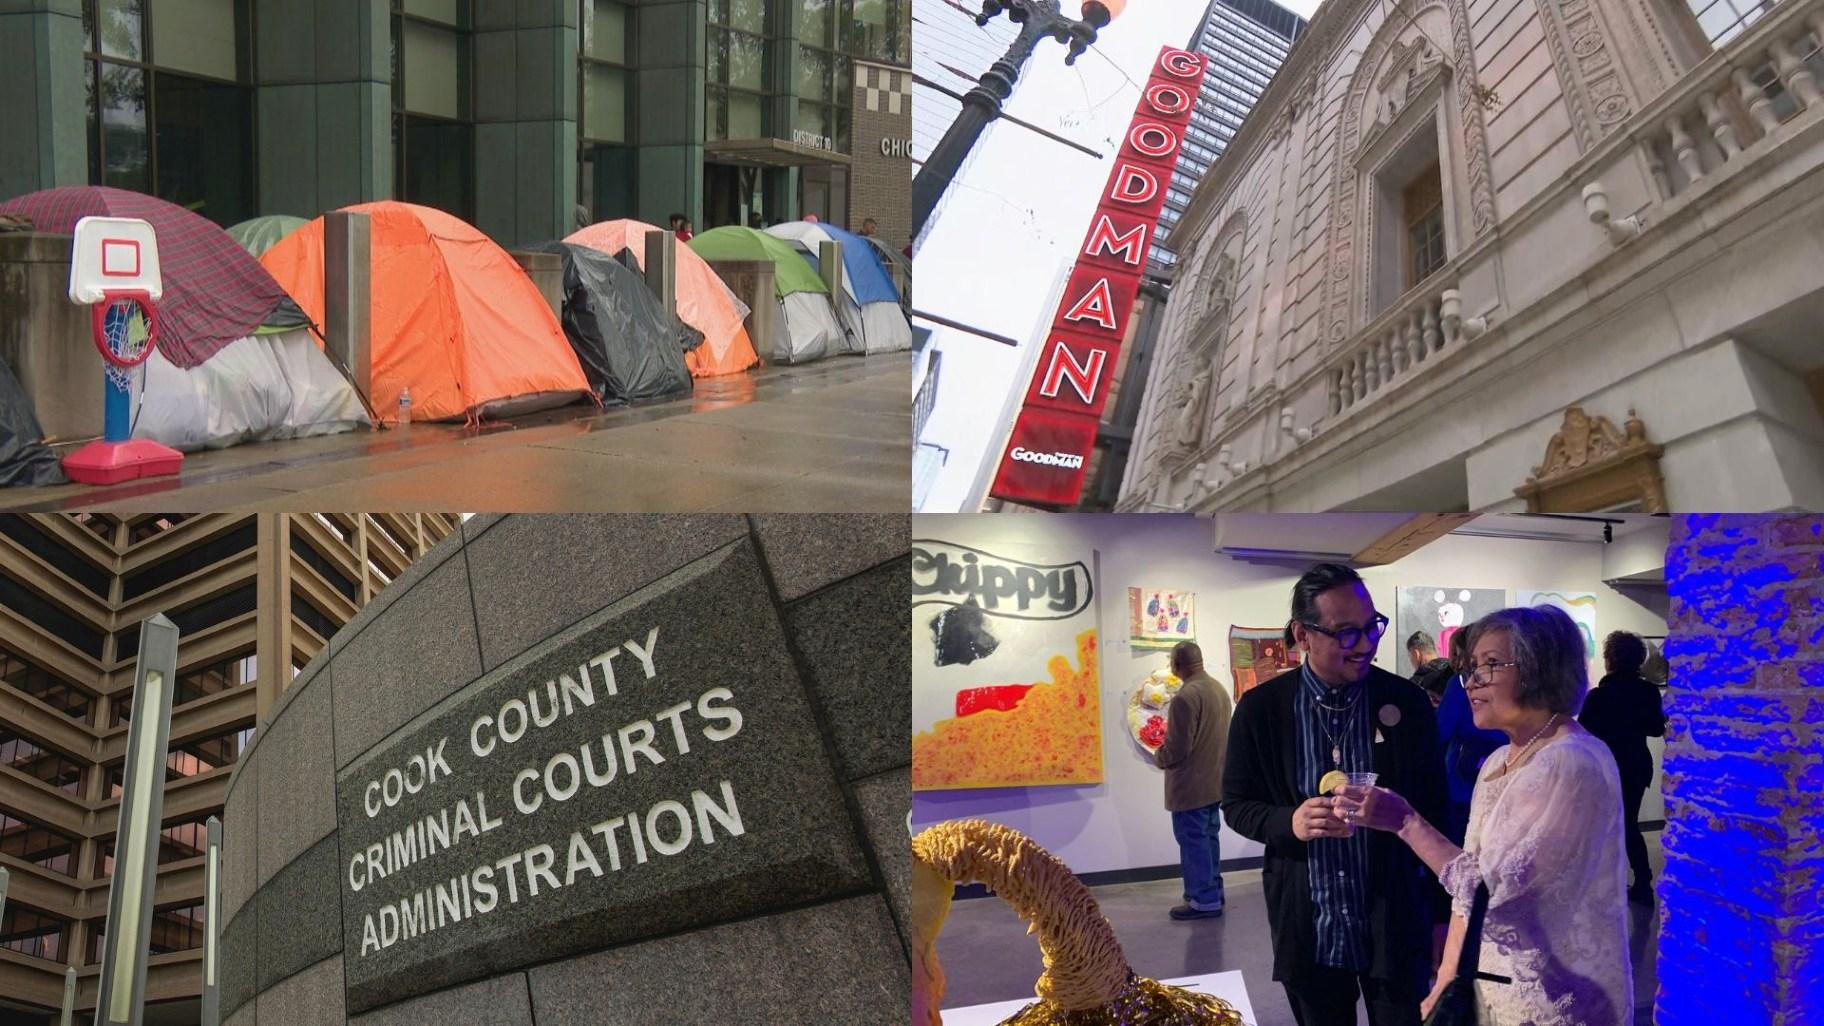 Top left: Migrants are sleeping in tents outside Chicago police stations. (WTTW News) Top right: Goodman Theater. (WTTW News) Bottom left: Leighton Criminal Courthouse in Chicago is pictured in a file photo. (Michael Izquierdo / WTTW News) Bottom right: Artist James Bulosan, left, and artist Tita Recometa-Brady, having a conversation at the “More than Lumpia” art exhibit on Oct. 6 at the Epiphany Center for the Arts. (Eunice Alpasan / WTTW News)